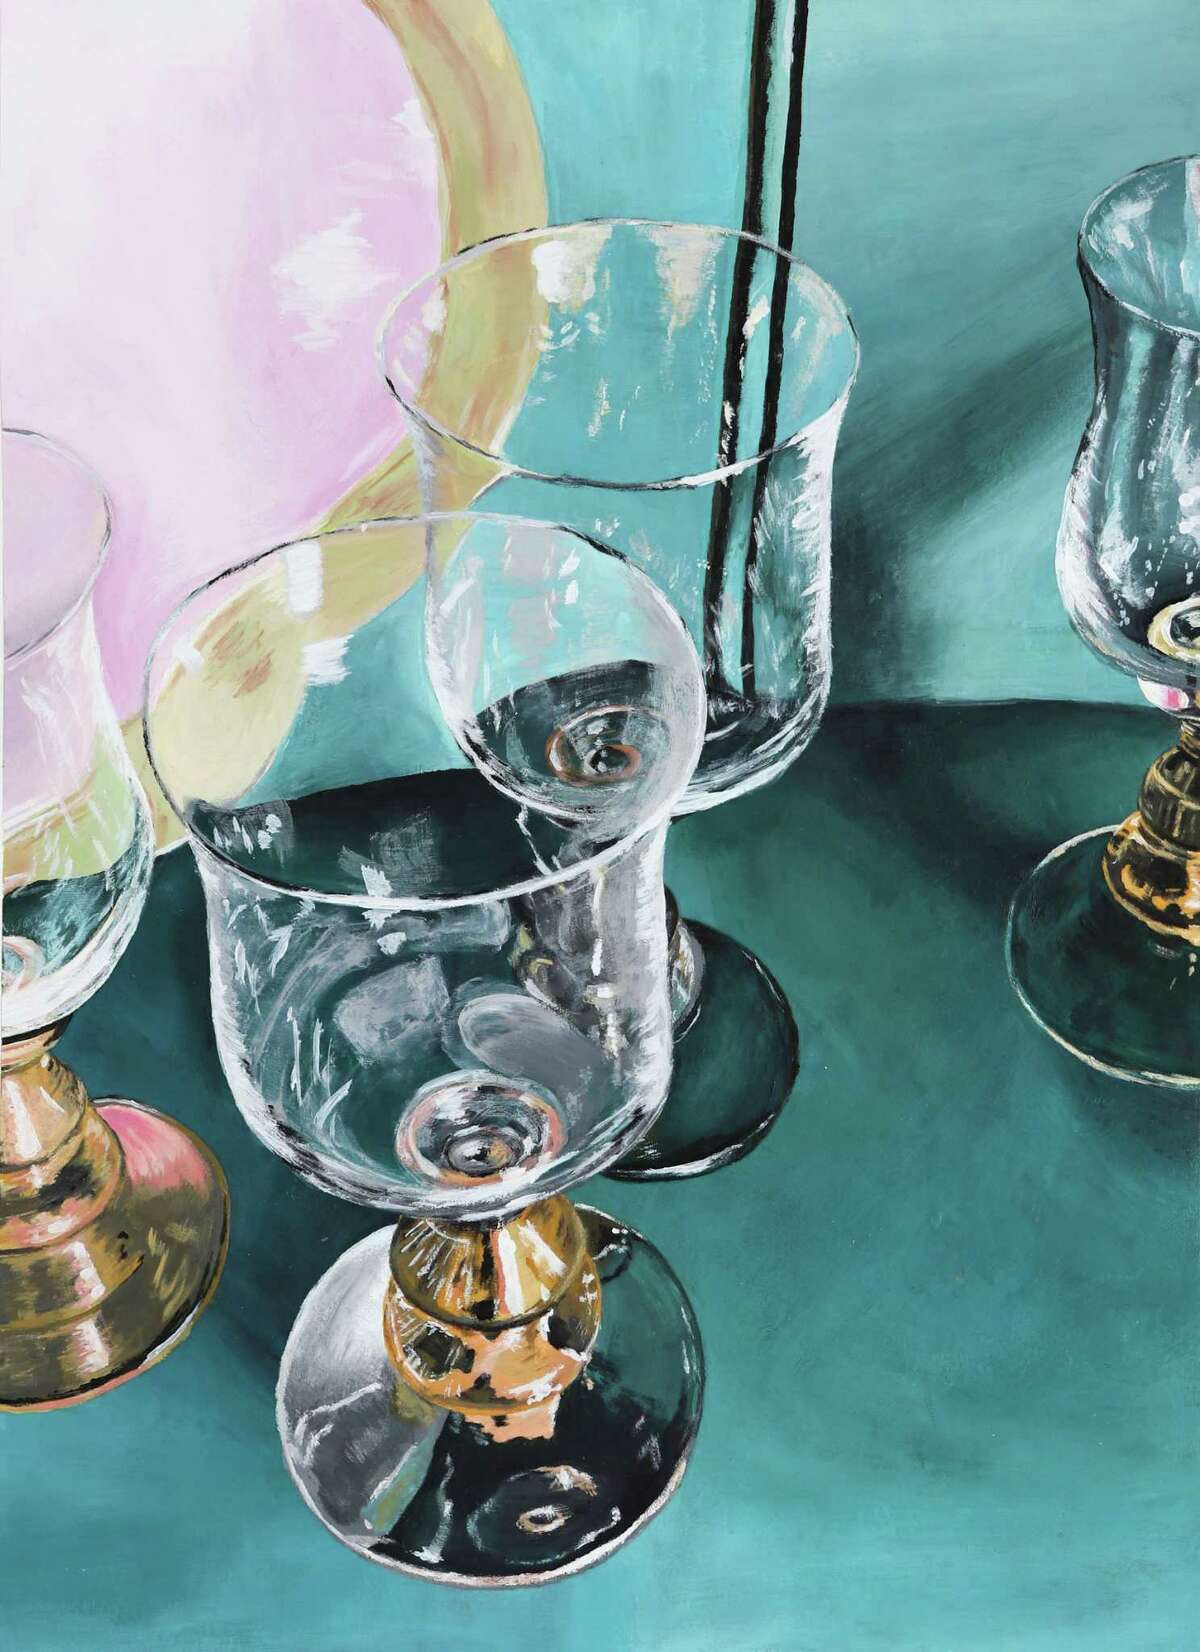 Twelfth grader Kinga Srednicka earned a Silver Key for the painting, “Glass and reflections.” Darien High School students recently earned honors at local art shows as part of the Connecticut Regional Scholastic Art Awards Program.